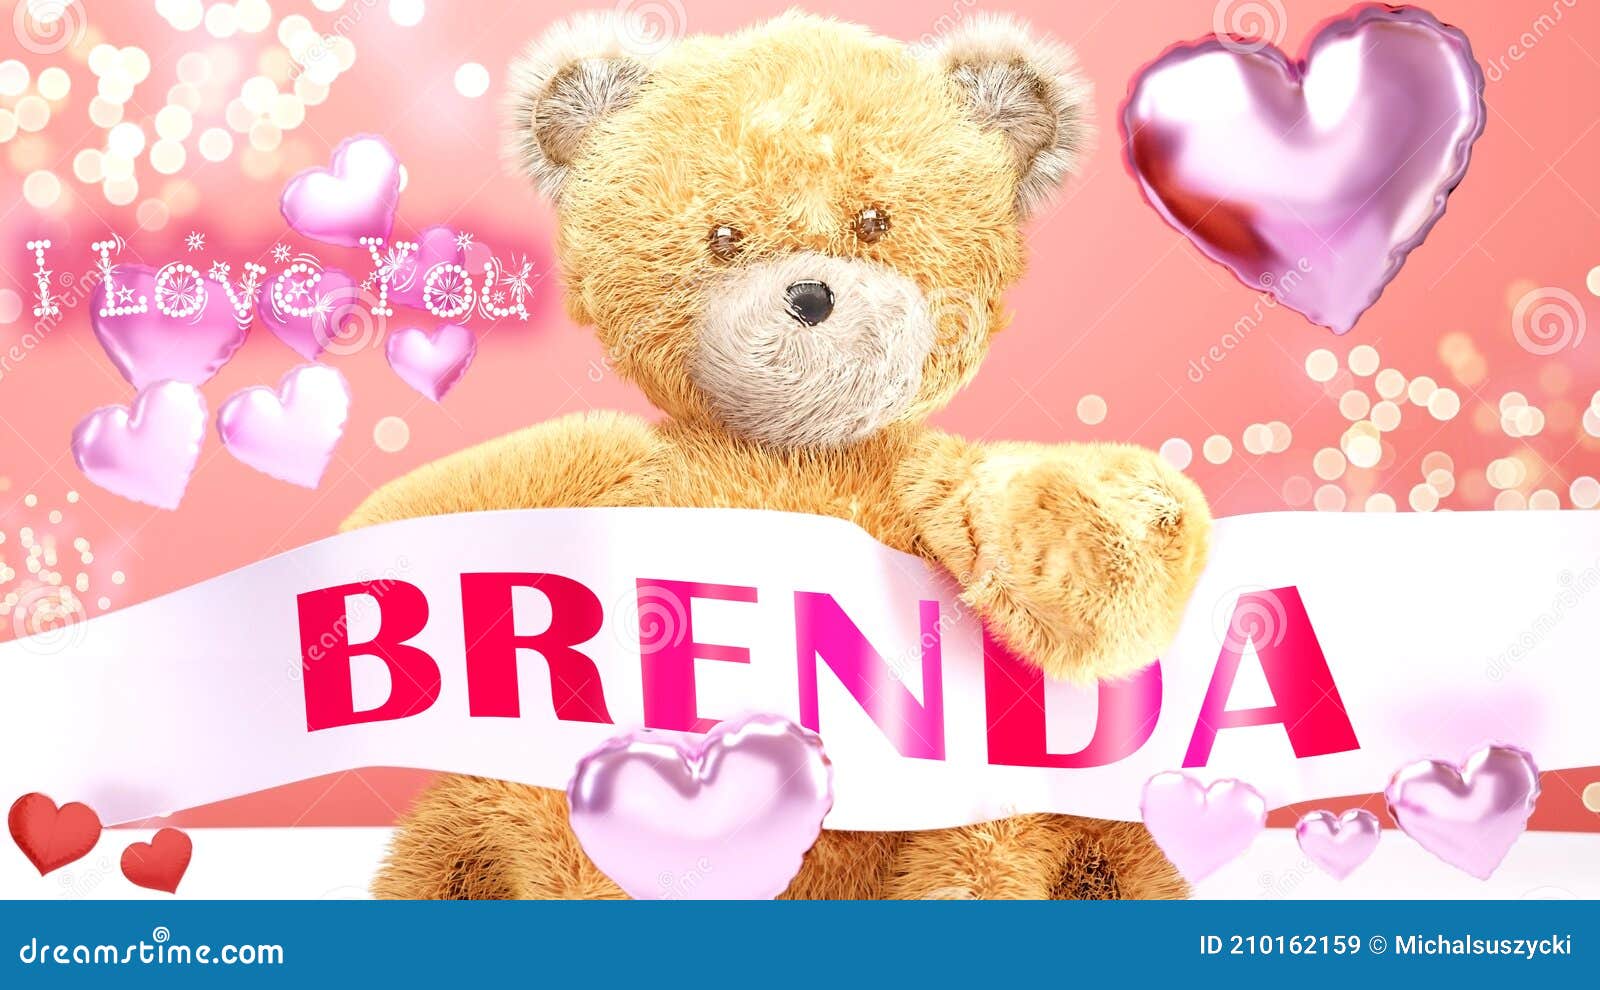 i love you brenda - cute and sweet teddy bear on a wedding, valentine`s or just to say i love you pink celebration card, joyful,